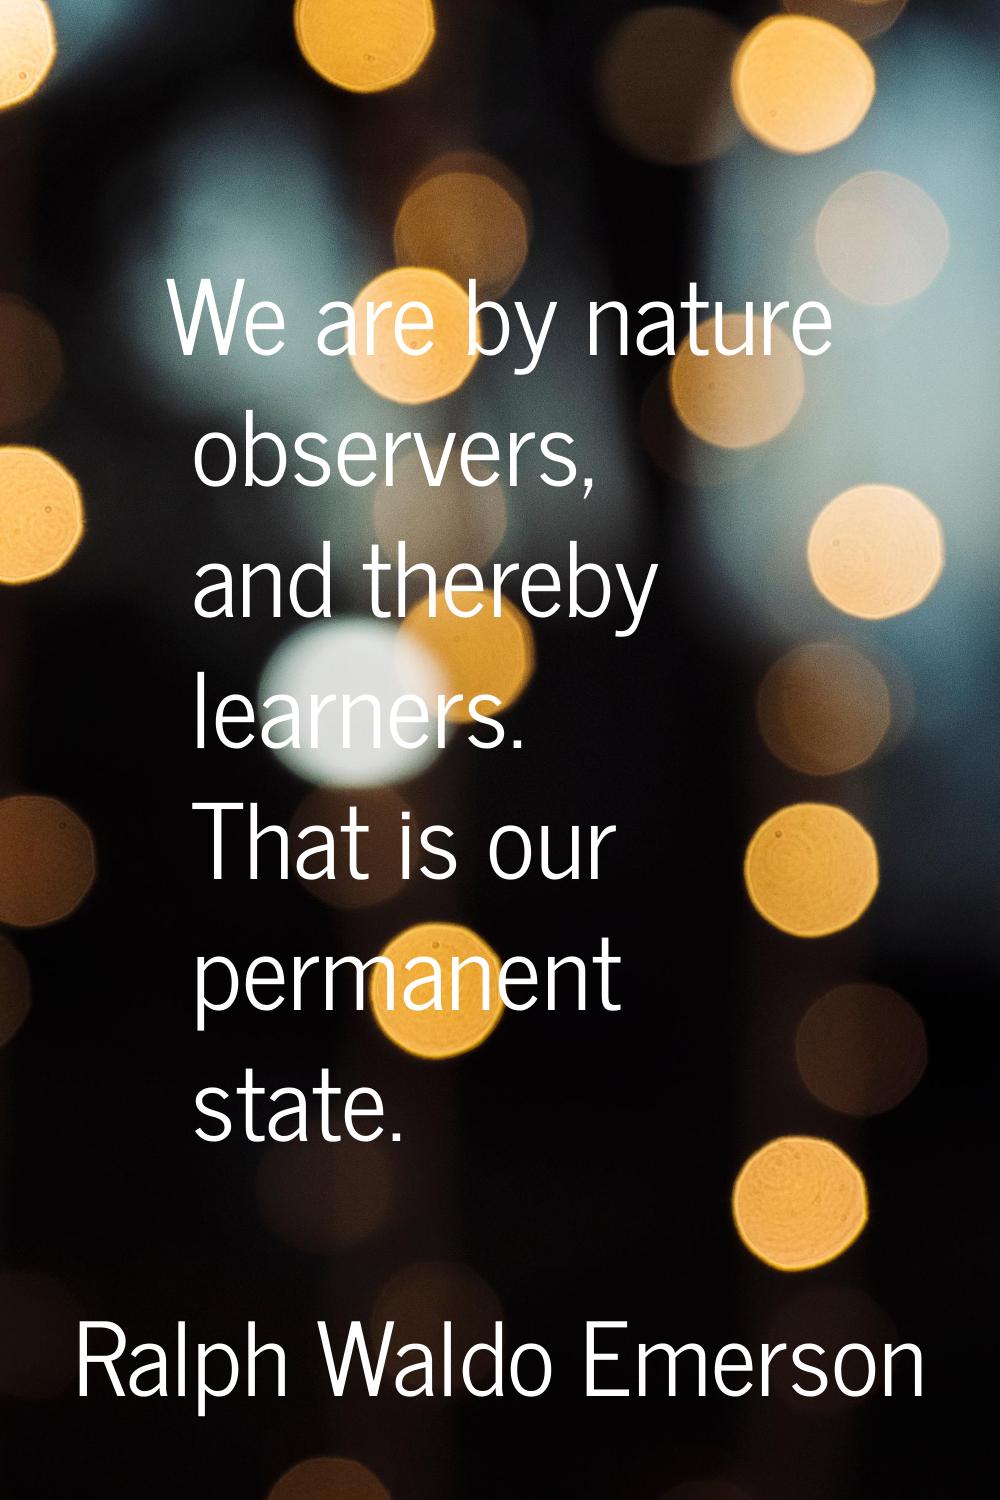 We are by nature observers, and thereby learners. That is our permanent state.